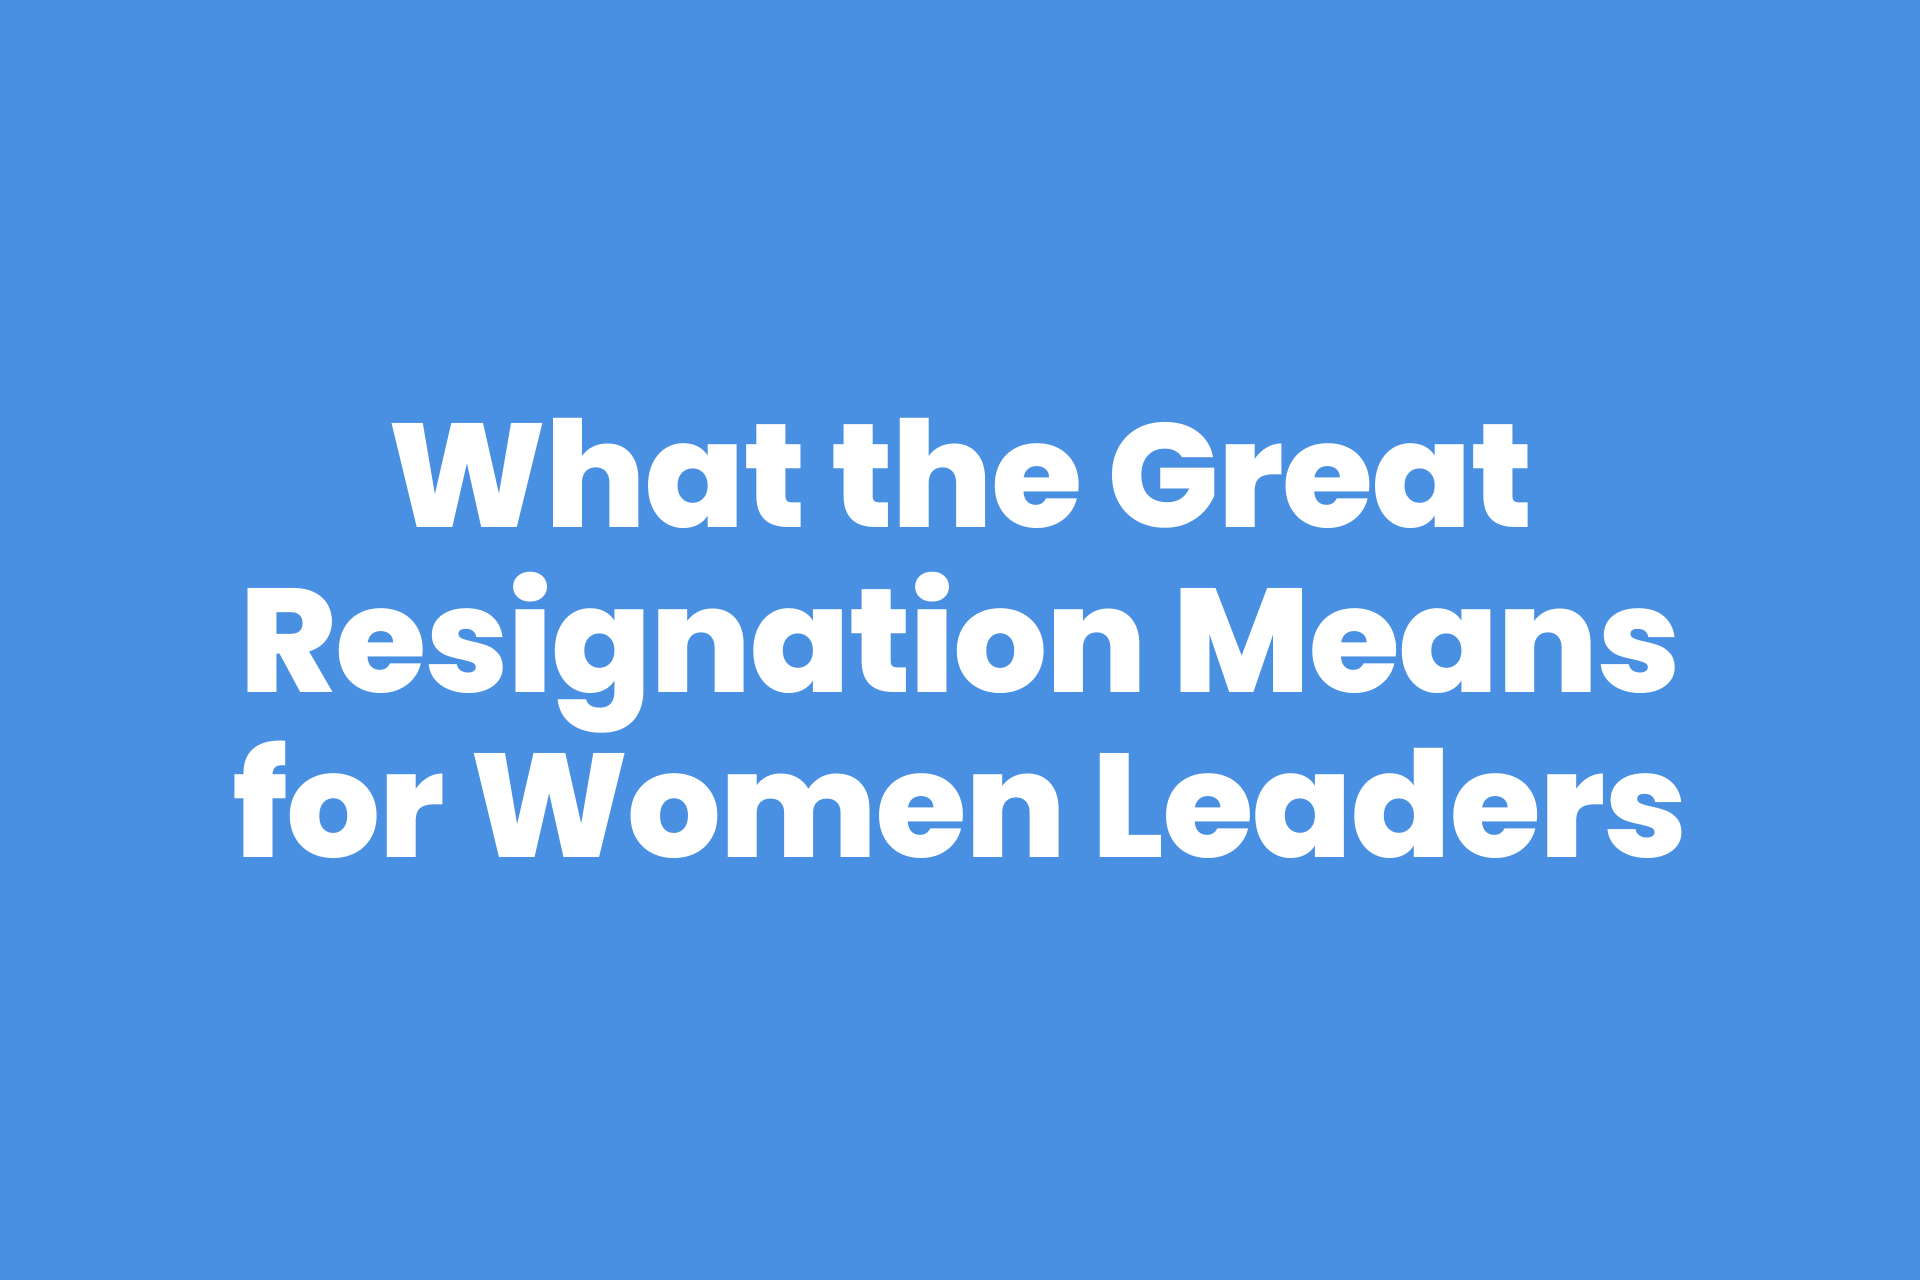 What the Great Resignation Means for Women Leaders